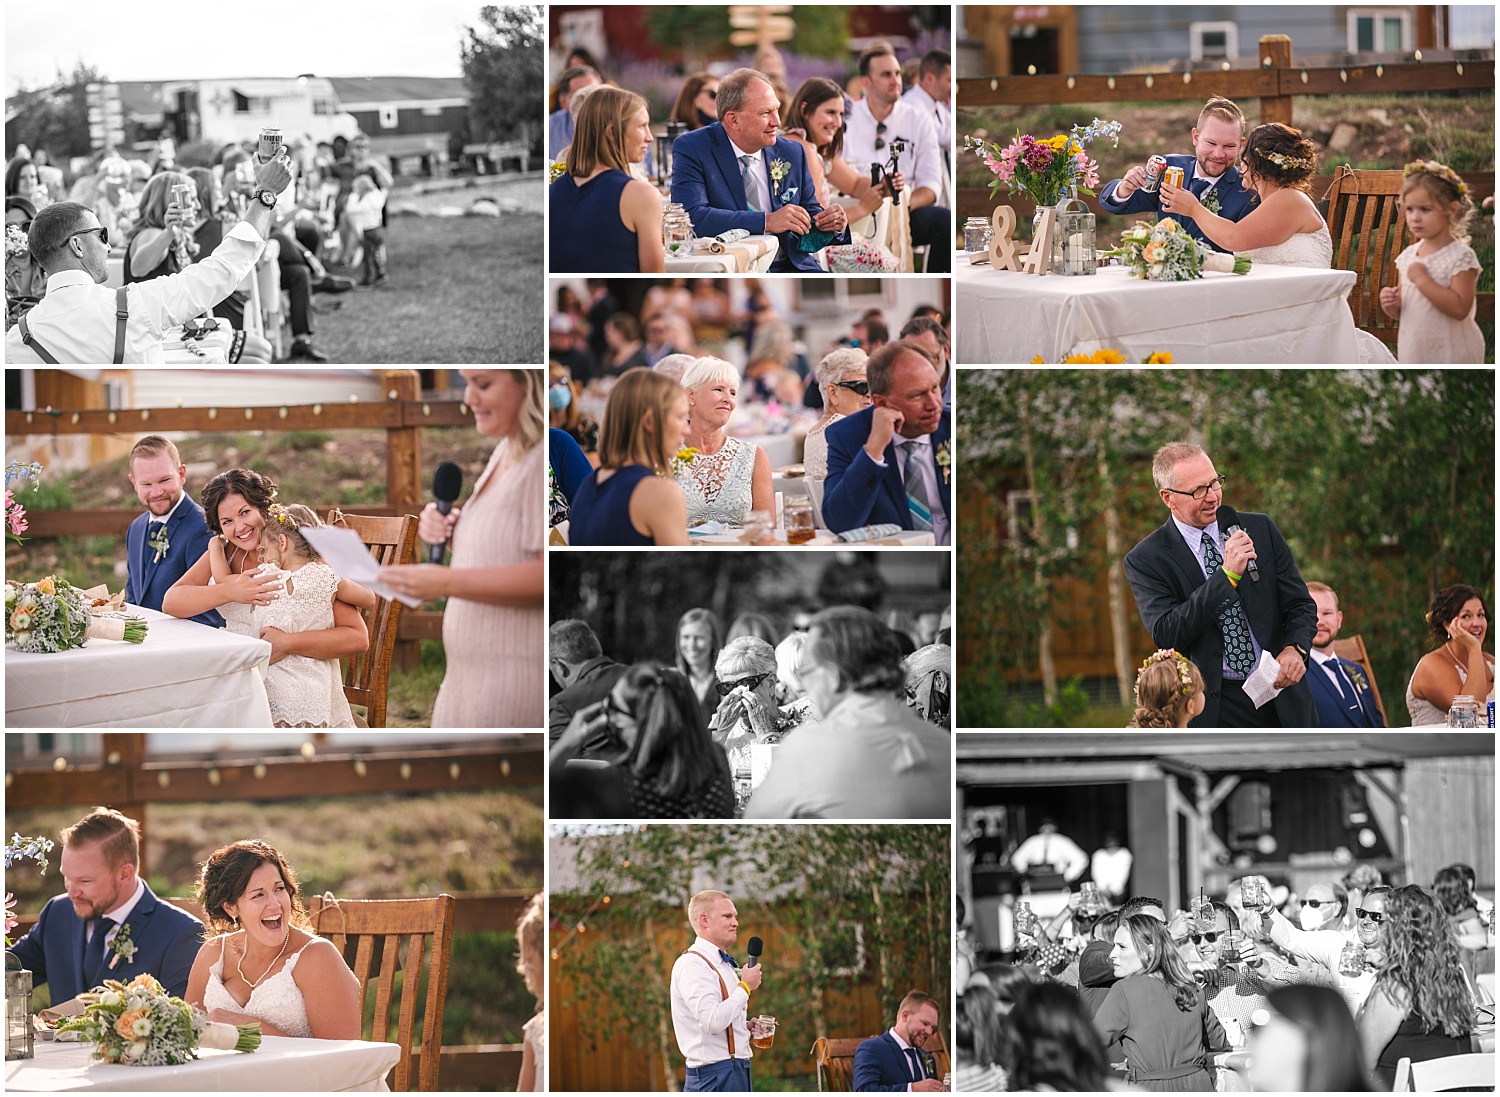 Toasts to the bride and groom at Guyton Ranch wedding